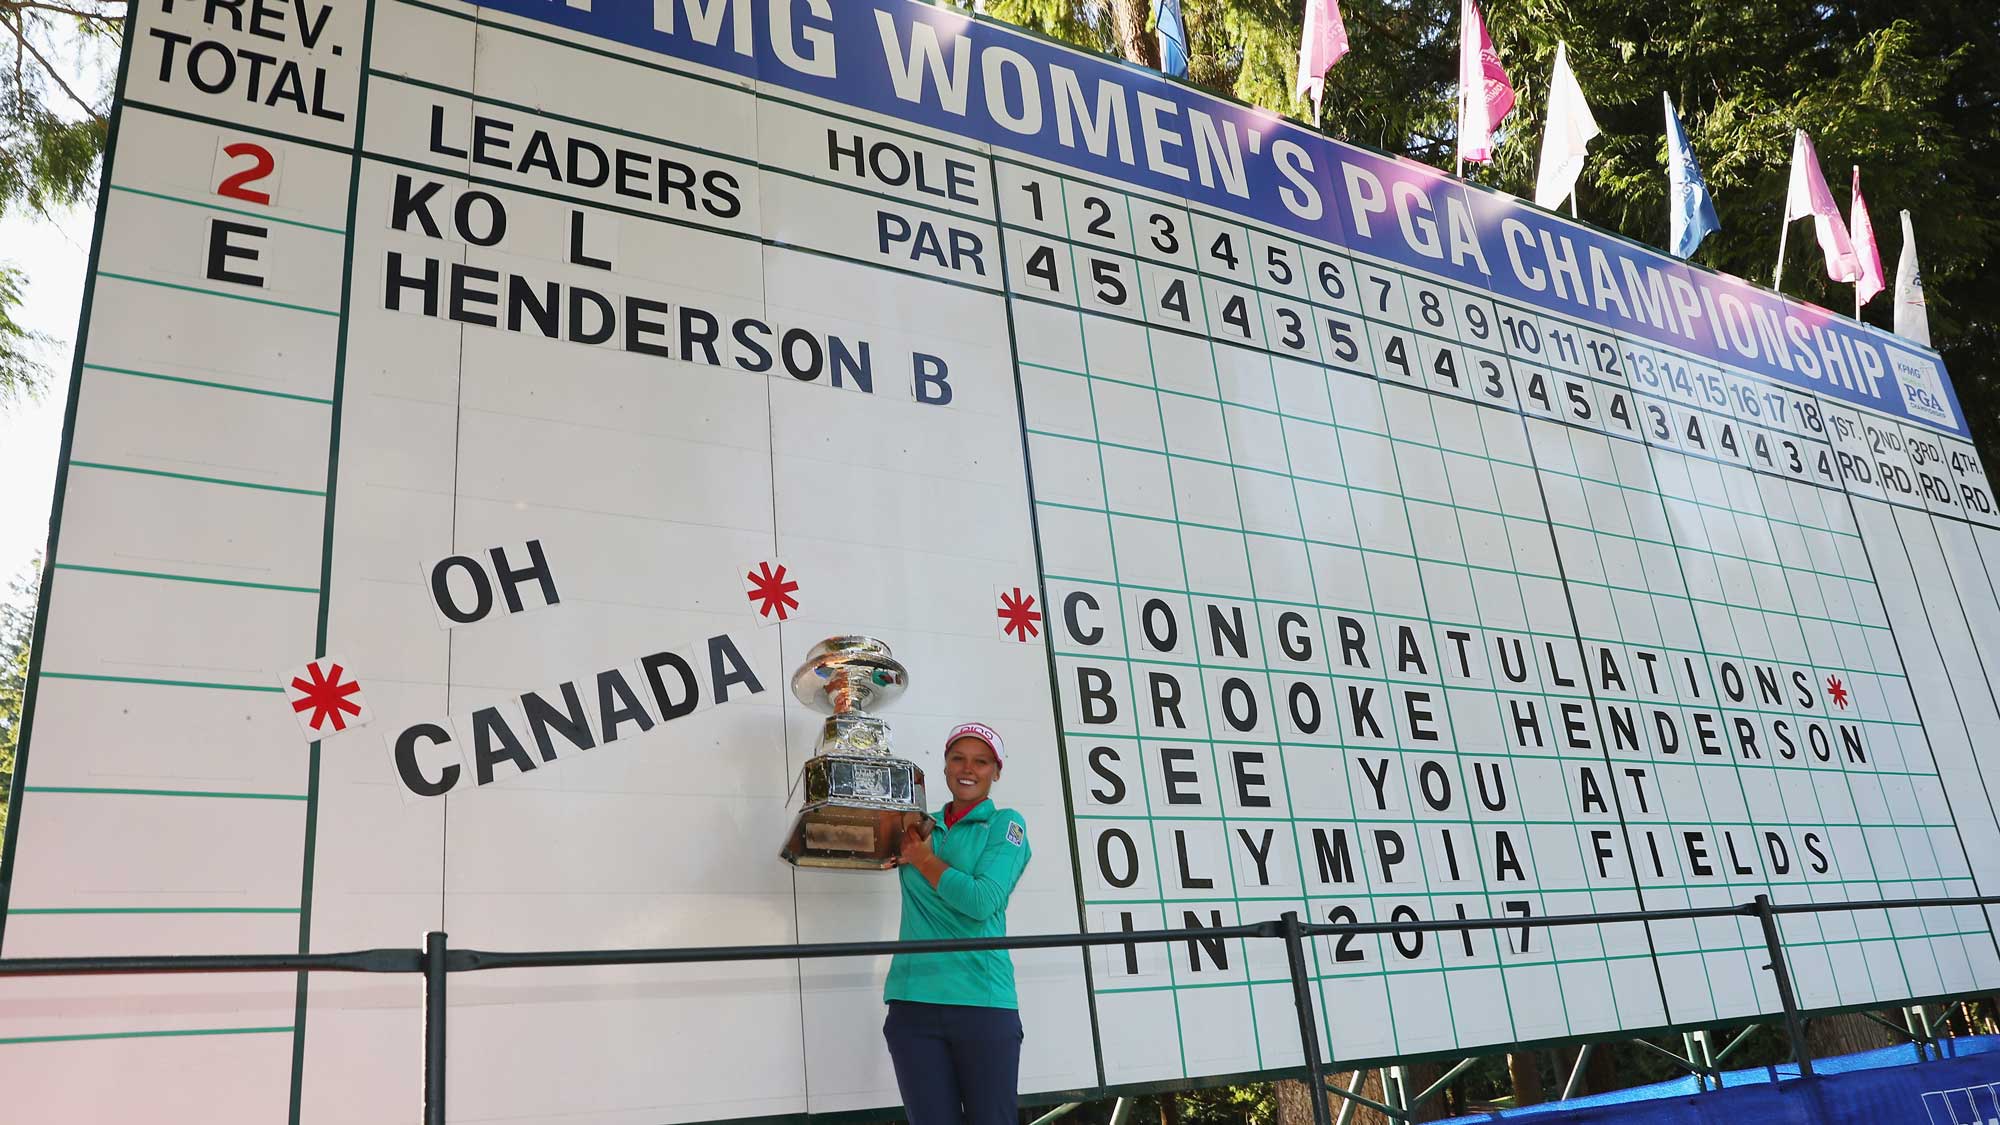 Brooke Henderson of Canada poses with the trophy after winning the KPMG Women's PGA Championship 